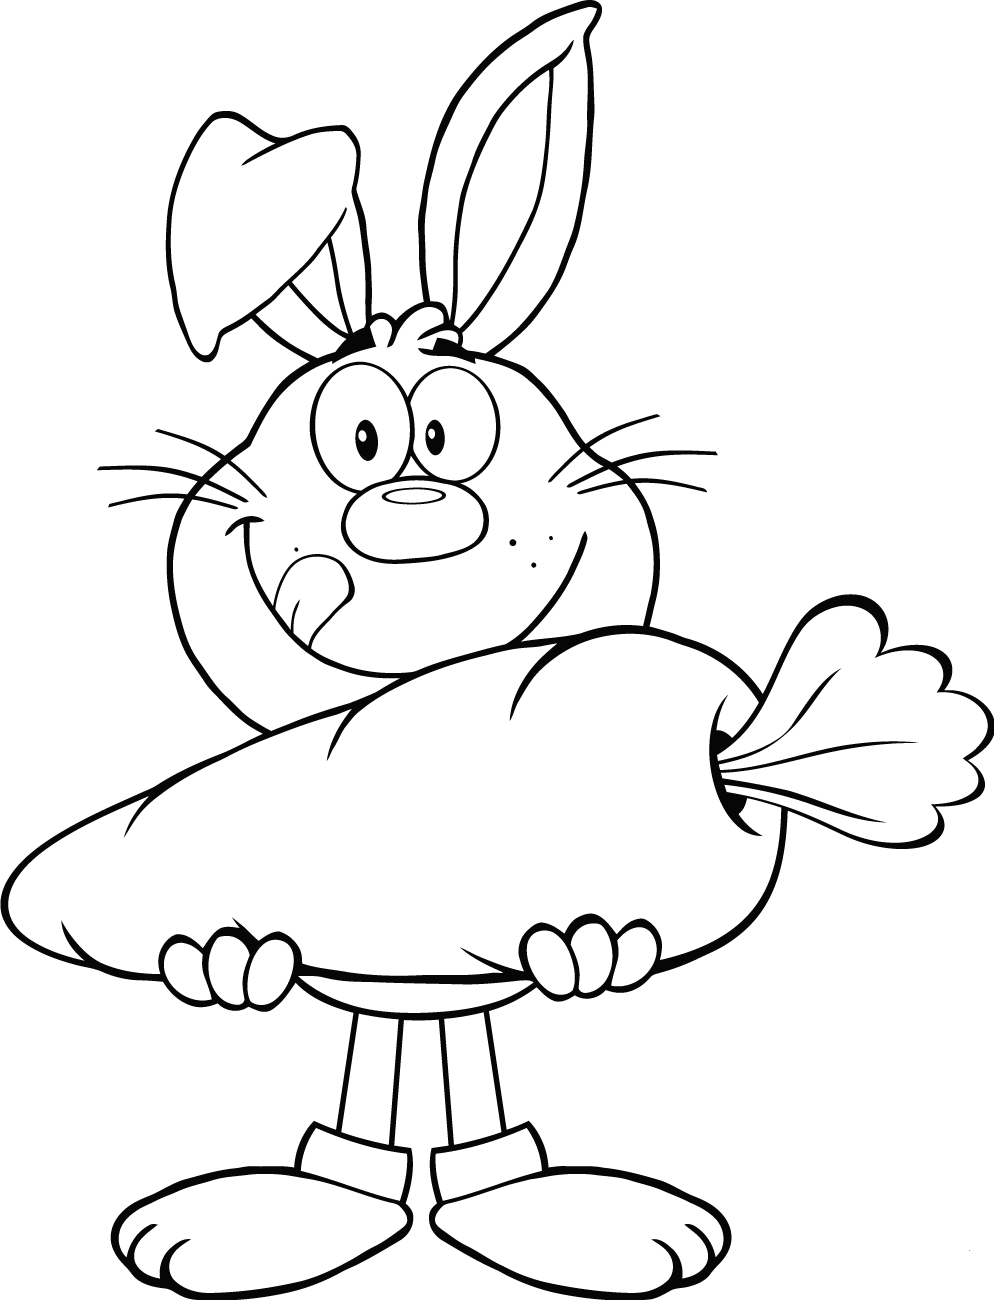 Rabbit With Big Carrot Coloring Page